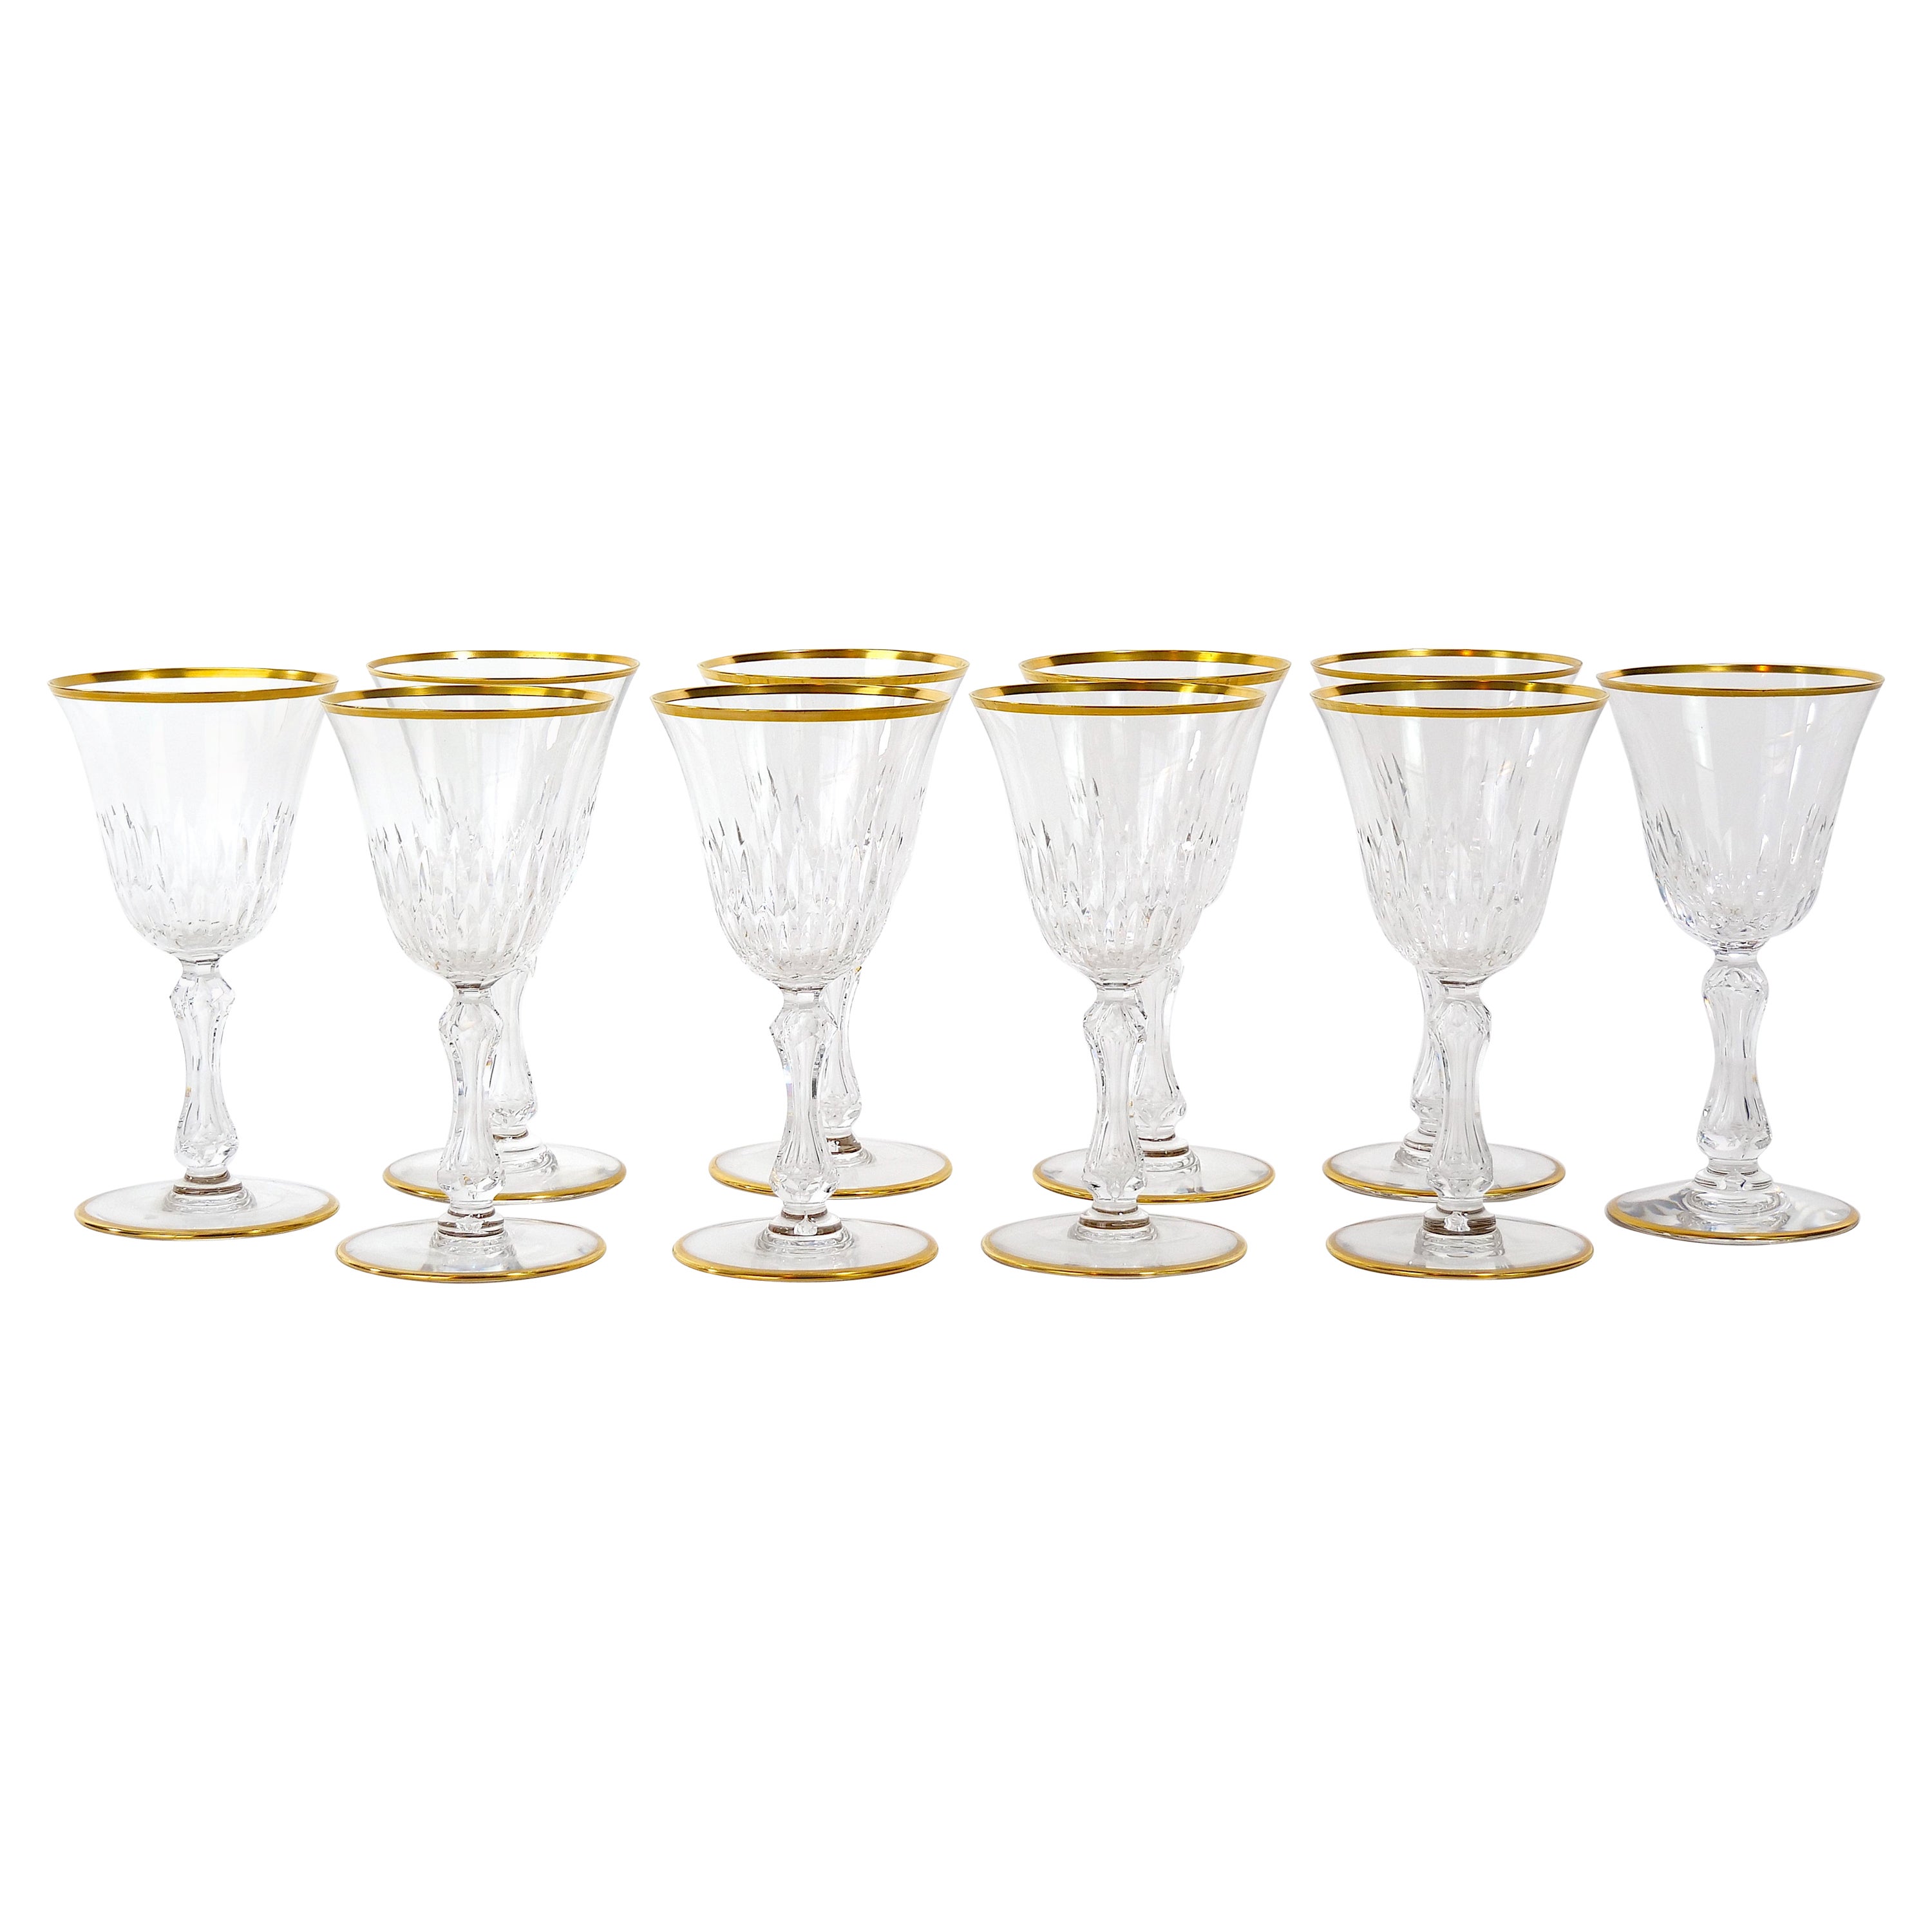 Saint Louis Crystal Gold Trim Tableware Service / 12 People For Sale